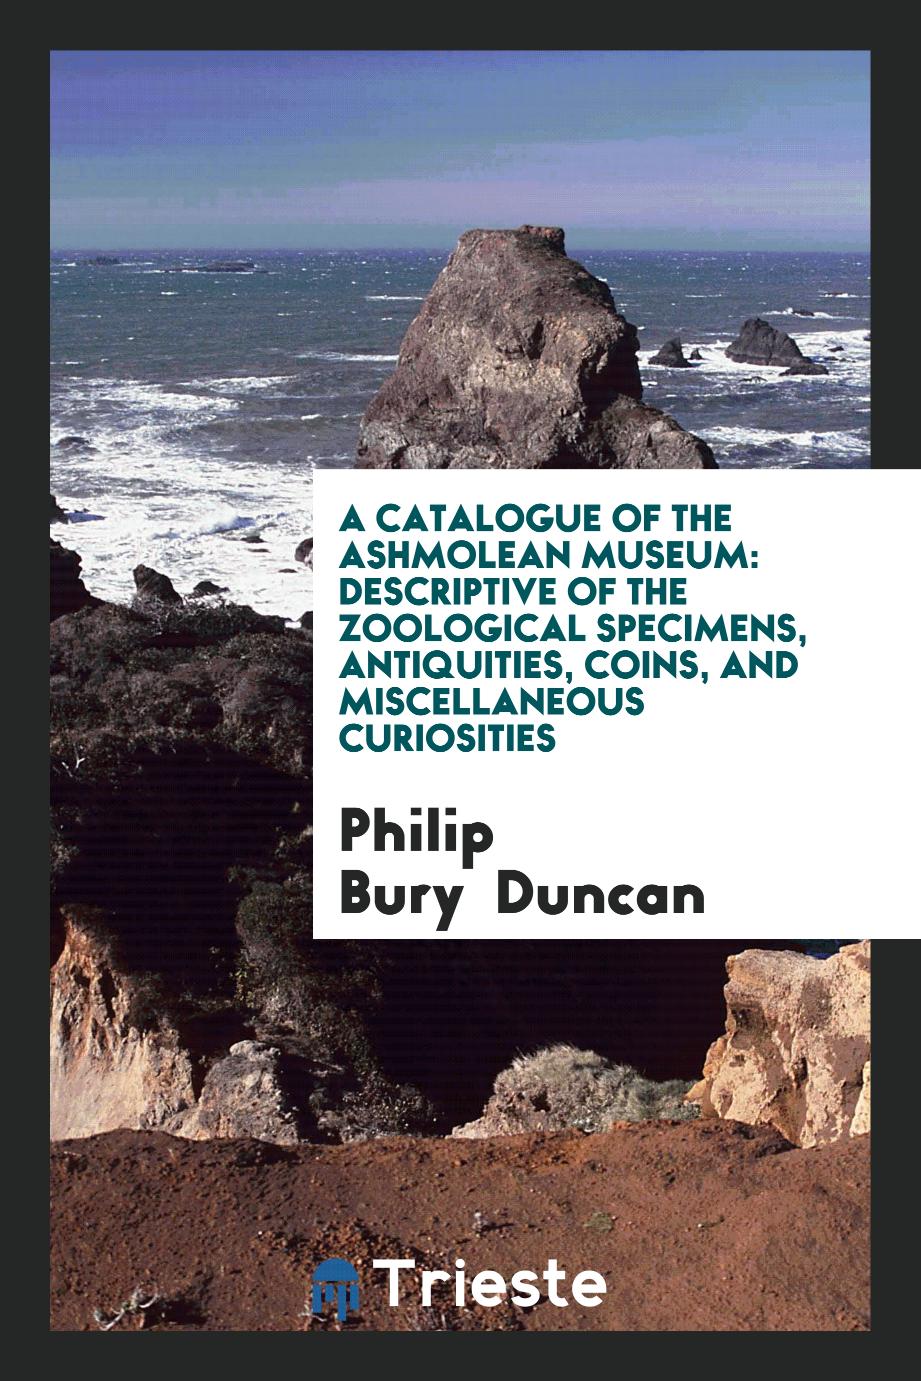 A Catalogue of the Ashmolean Museum: Descriptive of the Zoological Specimens, Antiquities, Coins, and Miscellaneous Curiosities